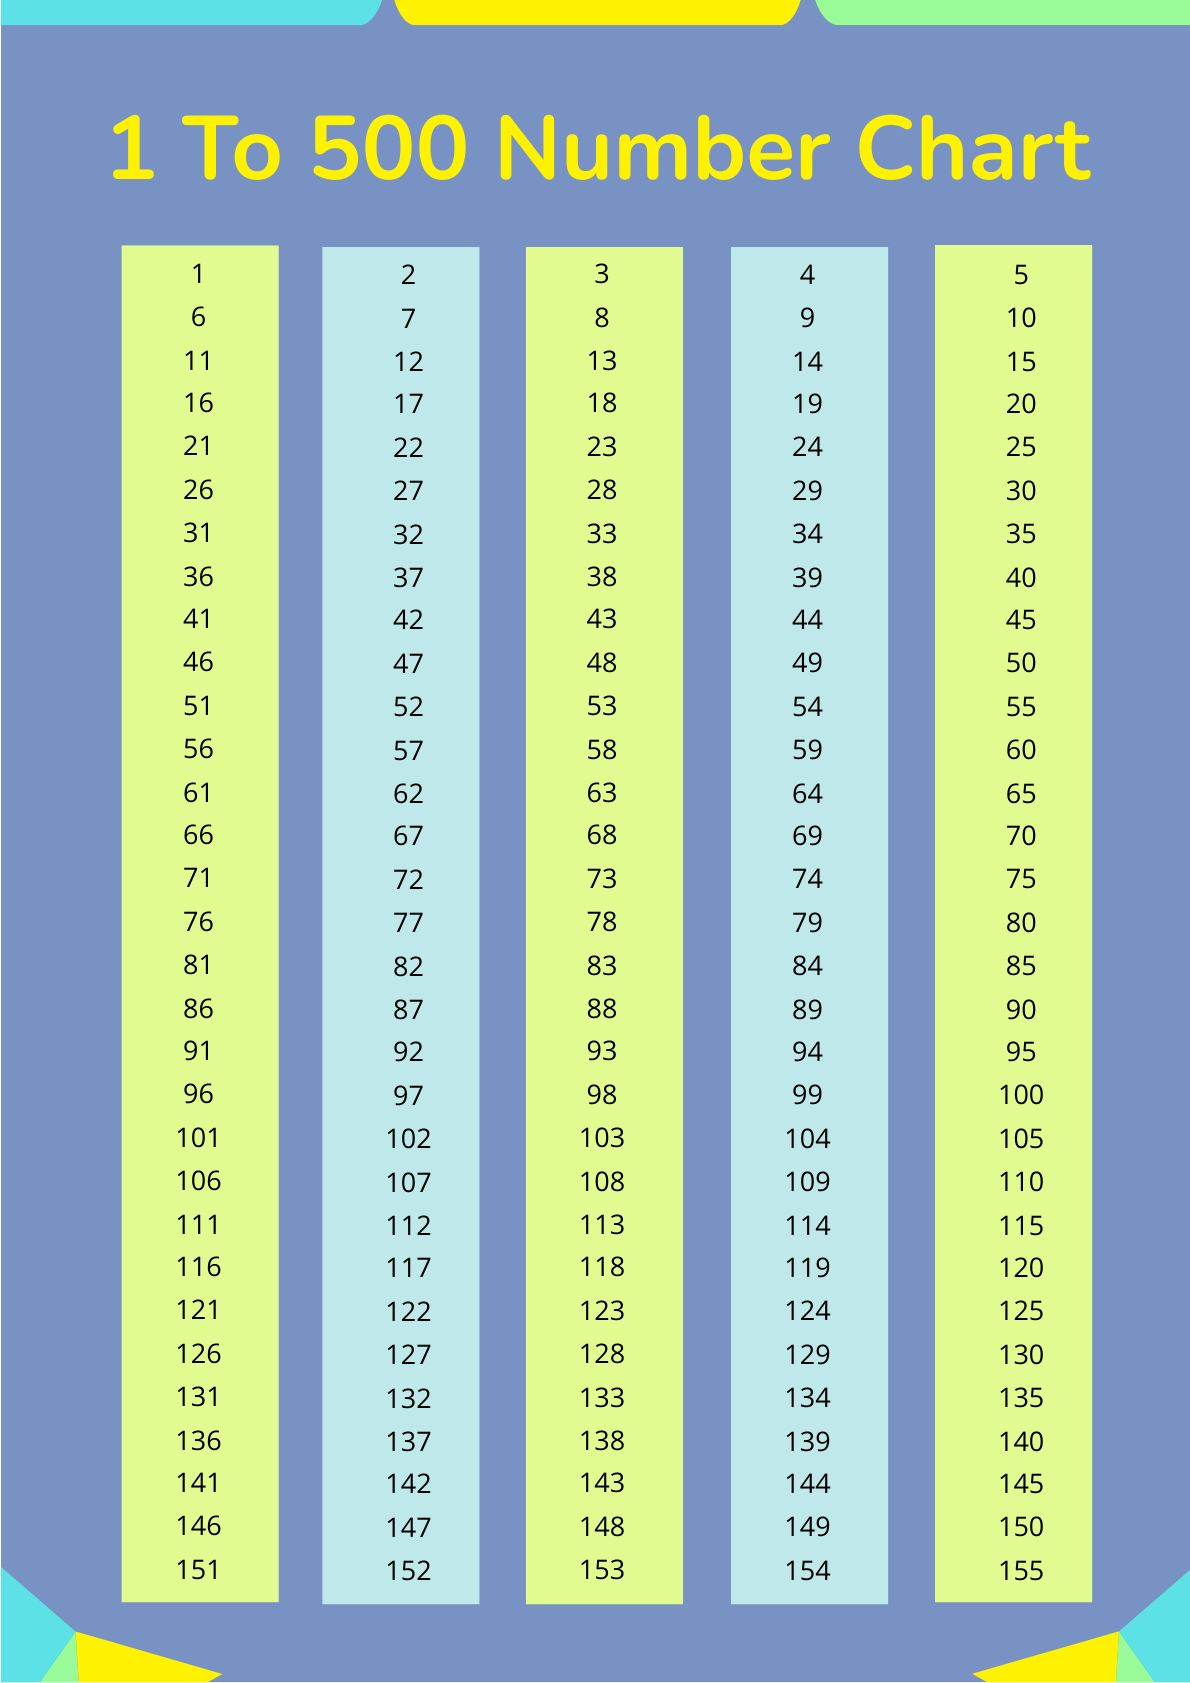 1 To 500 Number Chart in Illustrator, PDF - Download